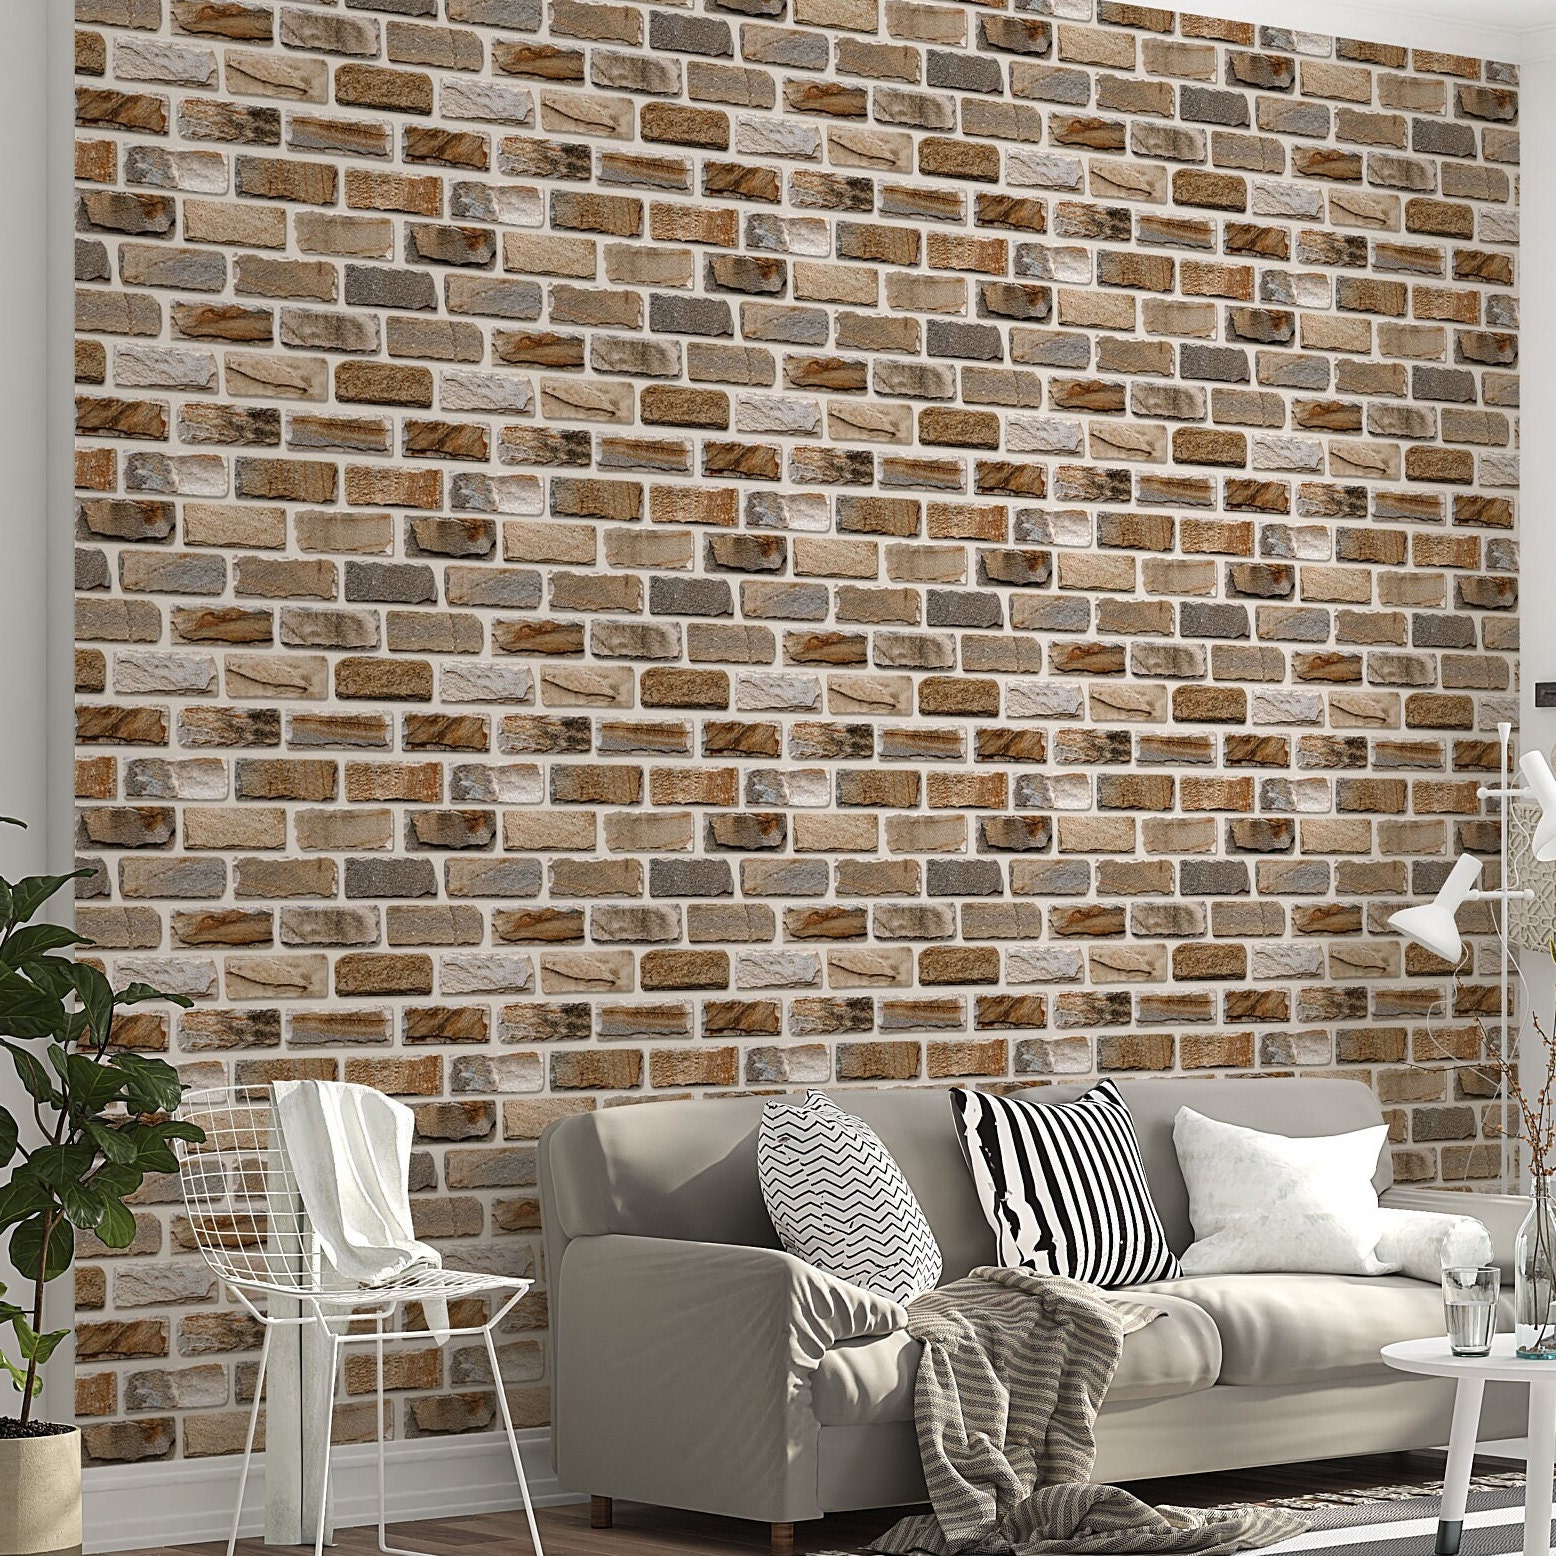 20ft White Gray Brick Wallpaper Peel And Stick Wallpaper Brick Vinyl Wrap selfadhesive  Wallpaper Backsplash Kitchen Living Room free Shipping  Fruugo IN